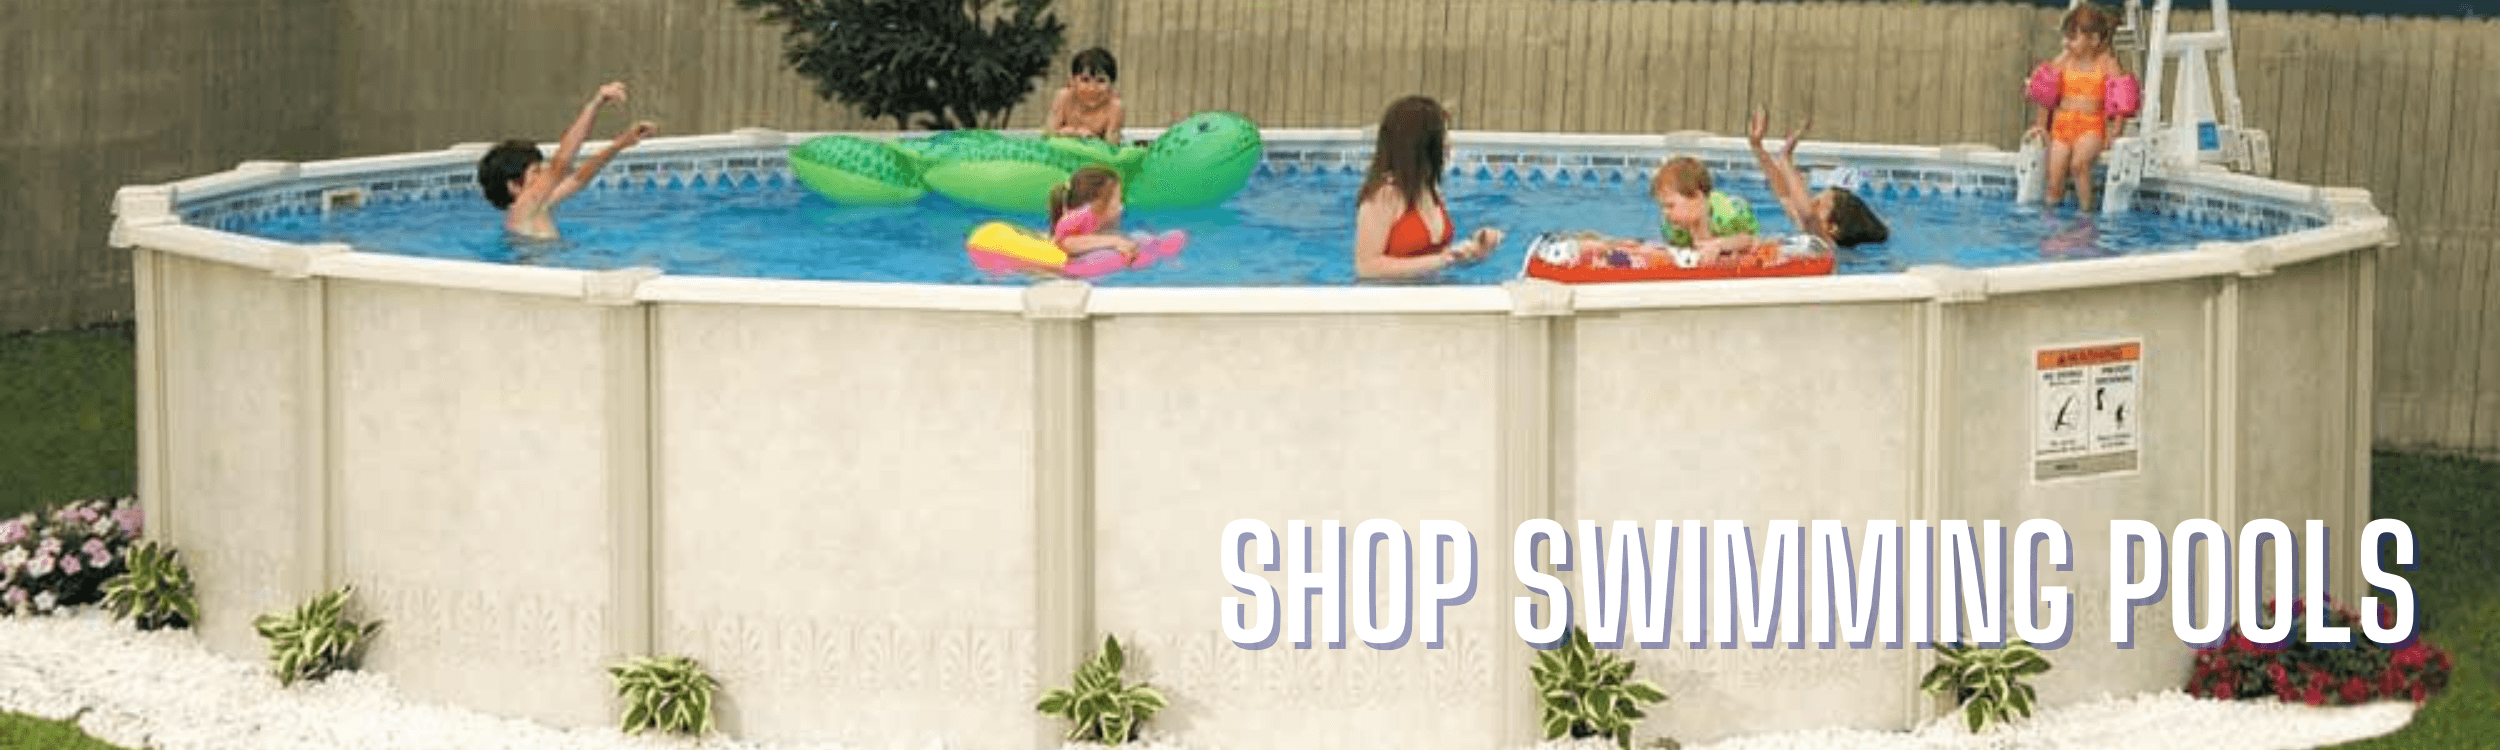 outdoor fun @ the LOWEST PRICES GUARANTEED!IMMEDIATE DELIVERY ON ALL IN-STOCK MODELS!